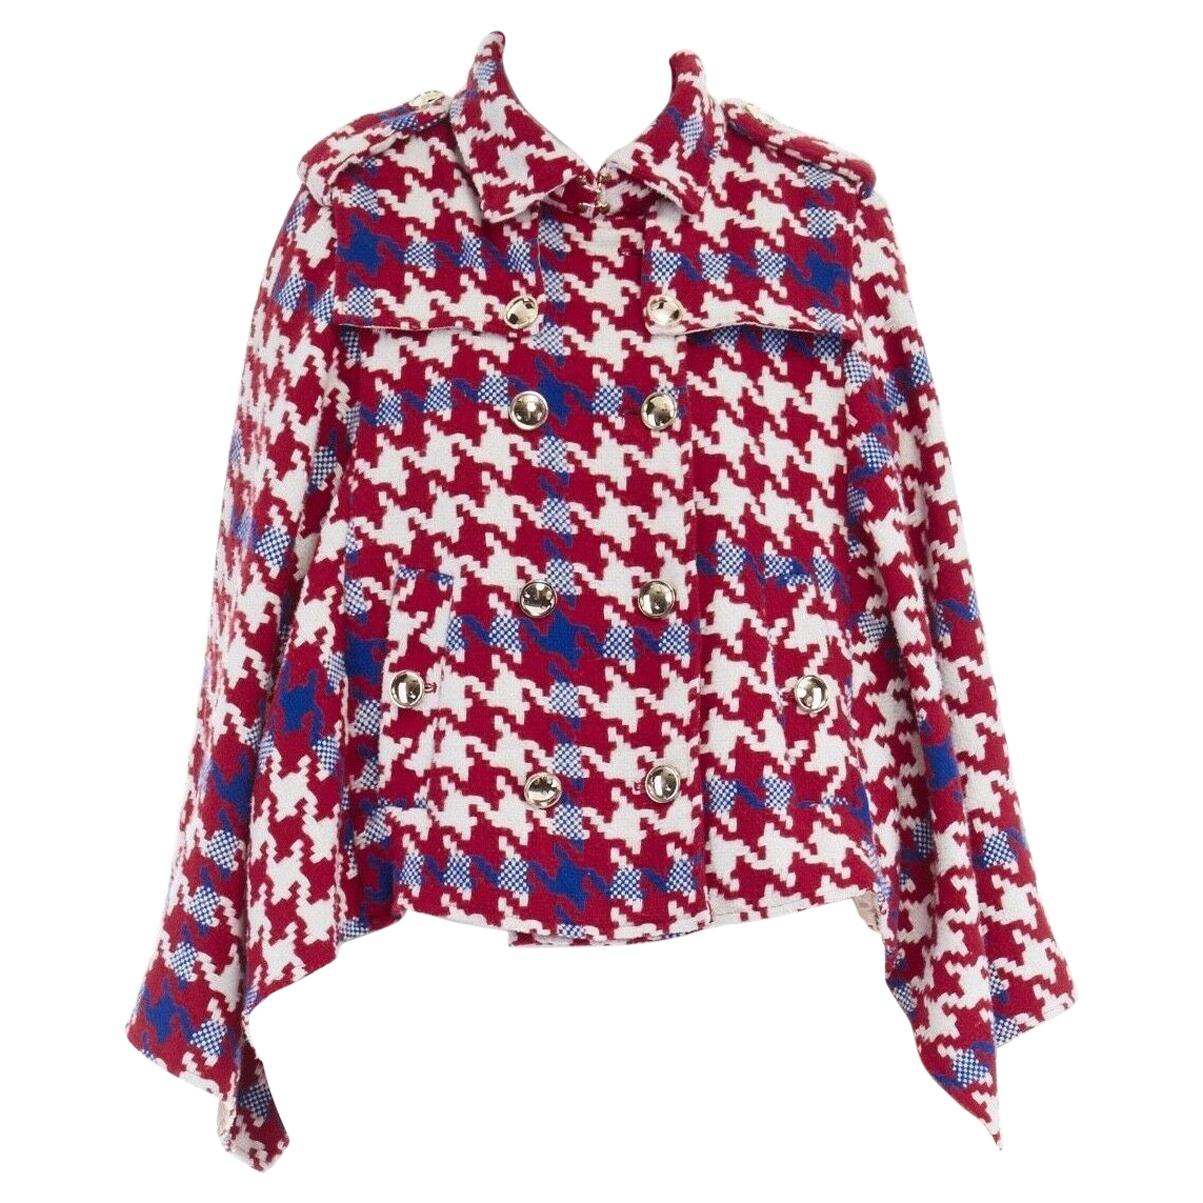 BURBERRY PRORSUM red blue houndstooth wool double breasted poncho cape jacket M